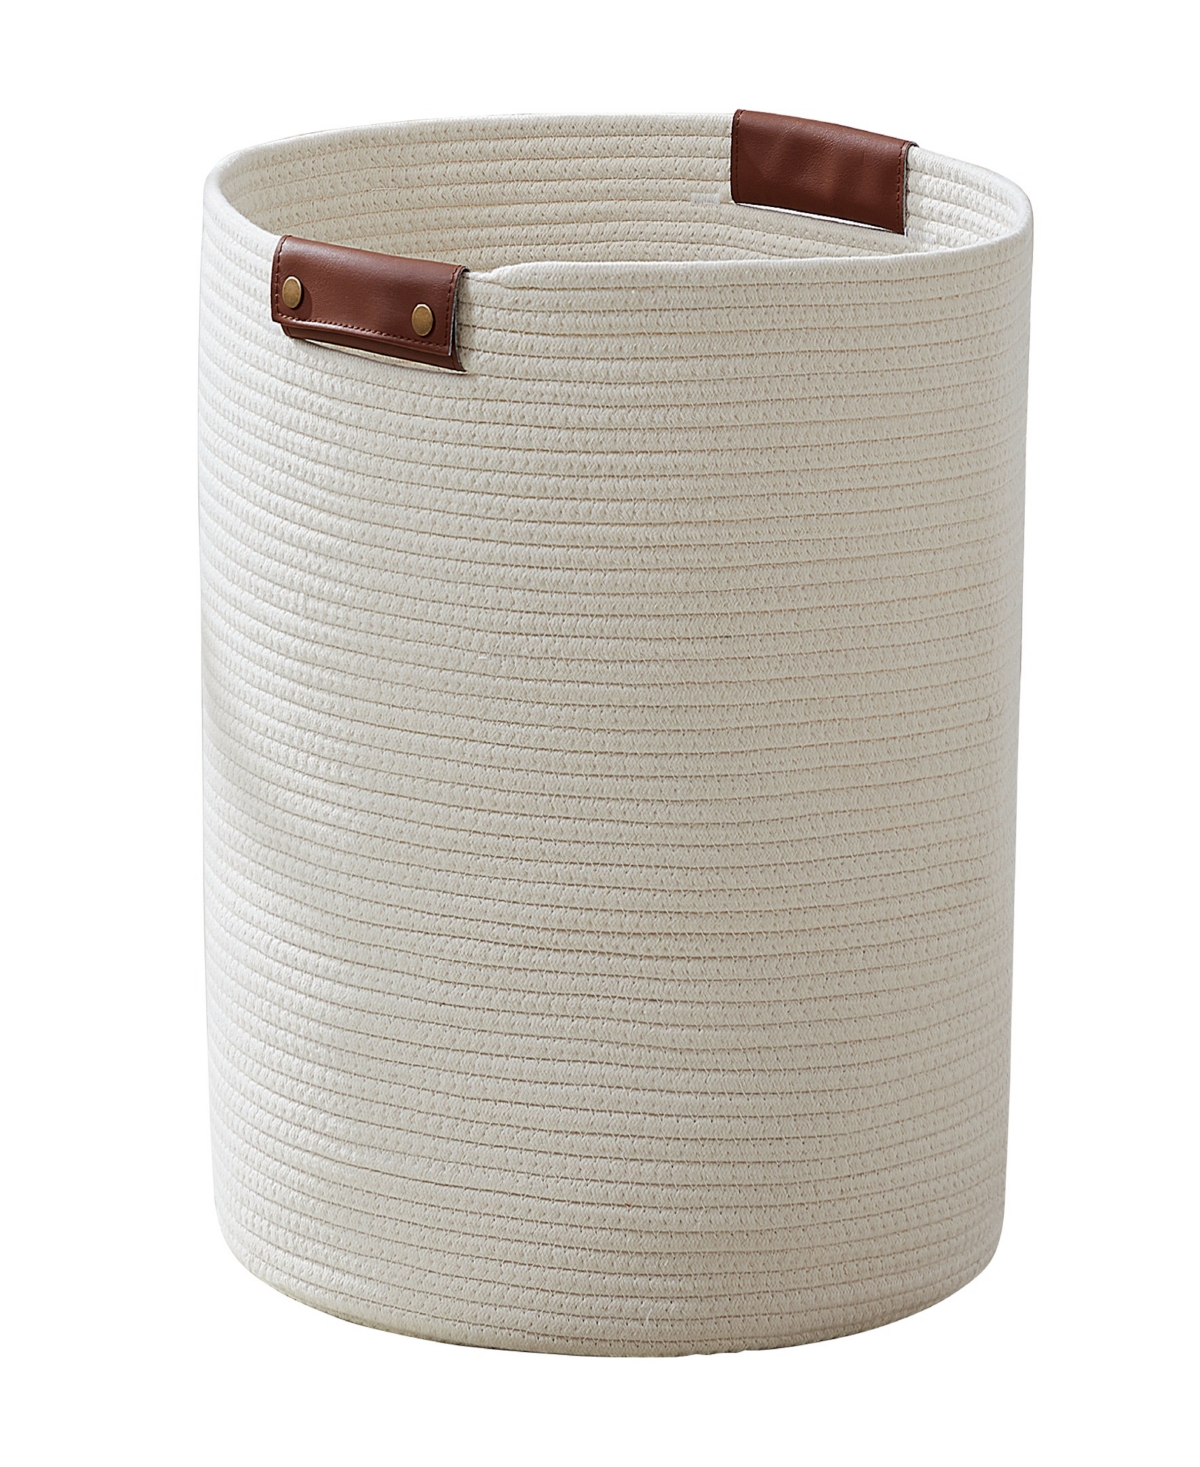 Large Cotton Rope Laundry Hamper Woven Basket with Leather Handles - Gray